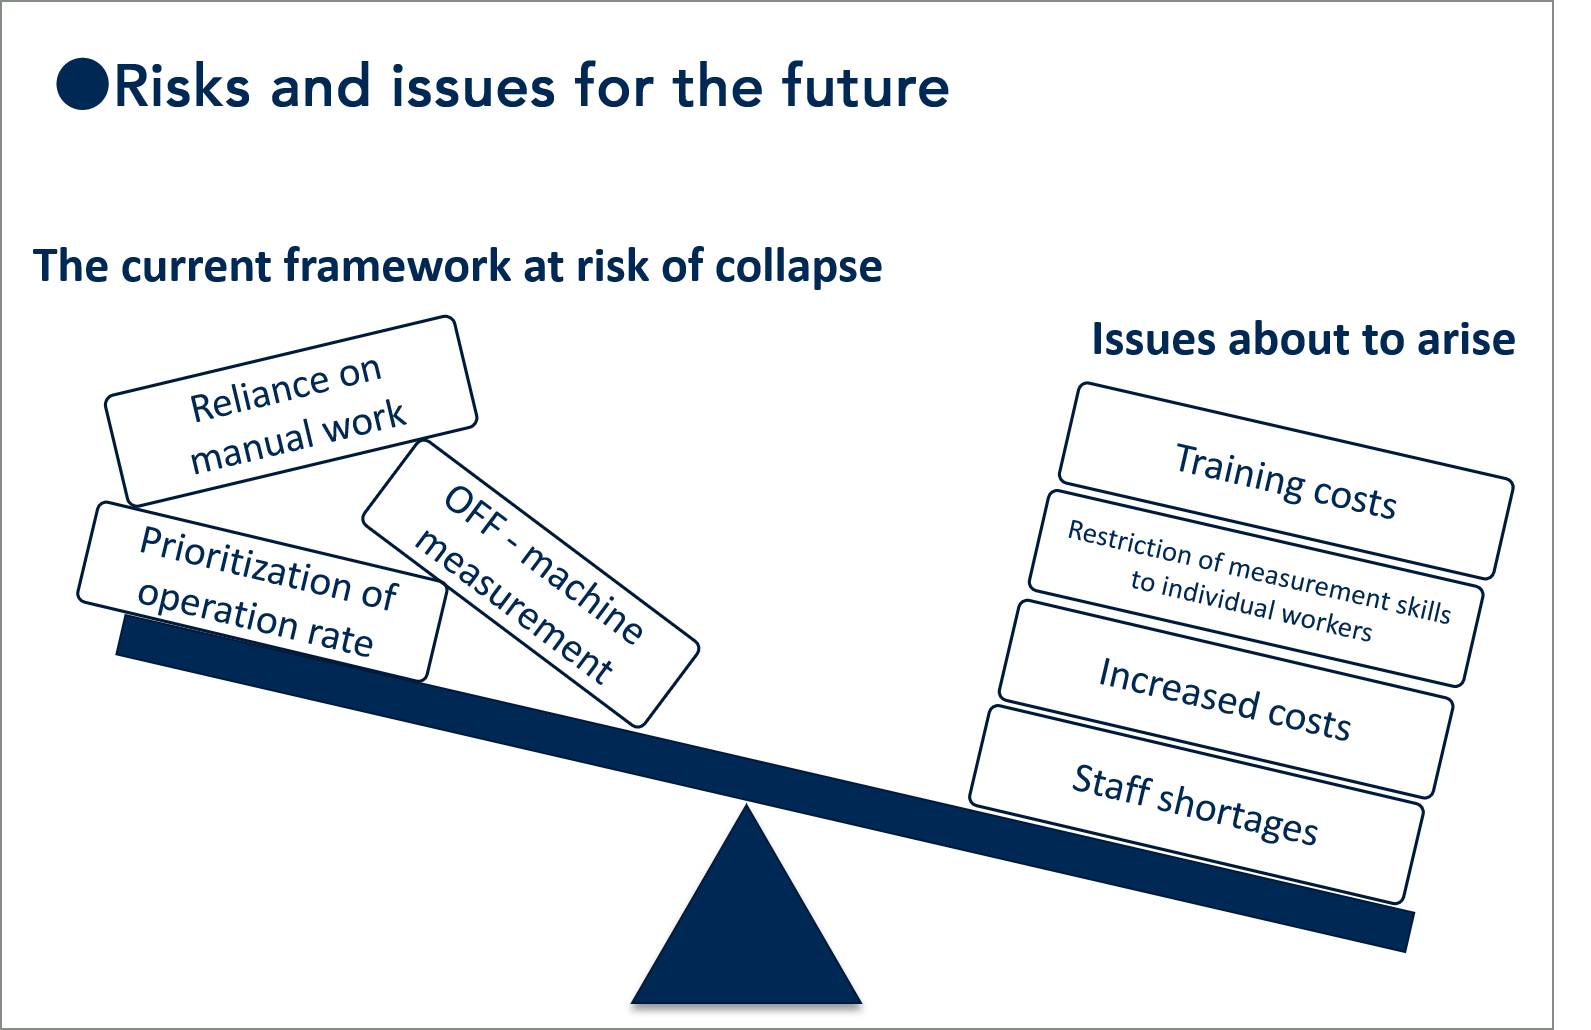 Risks and issues for the future